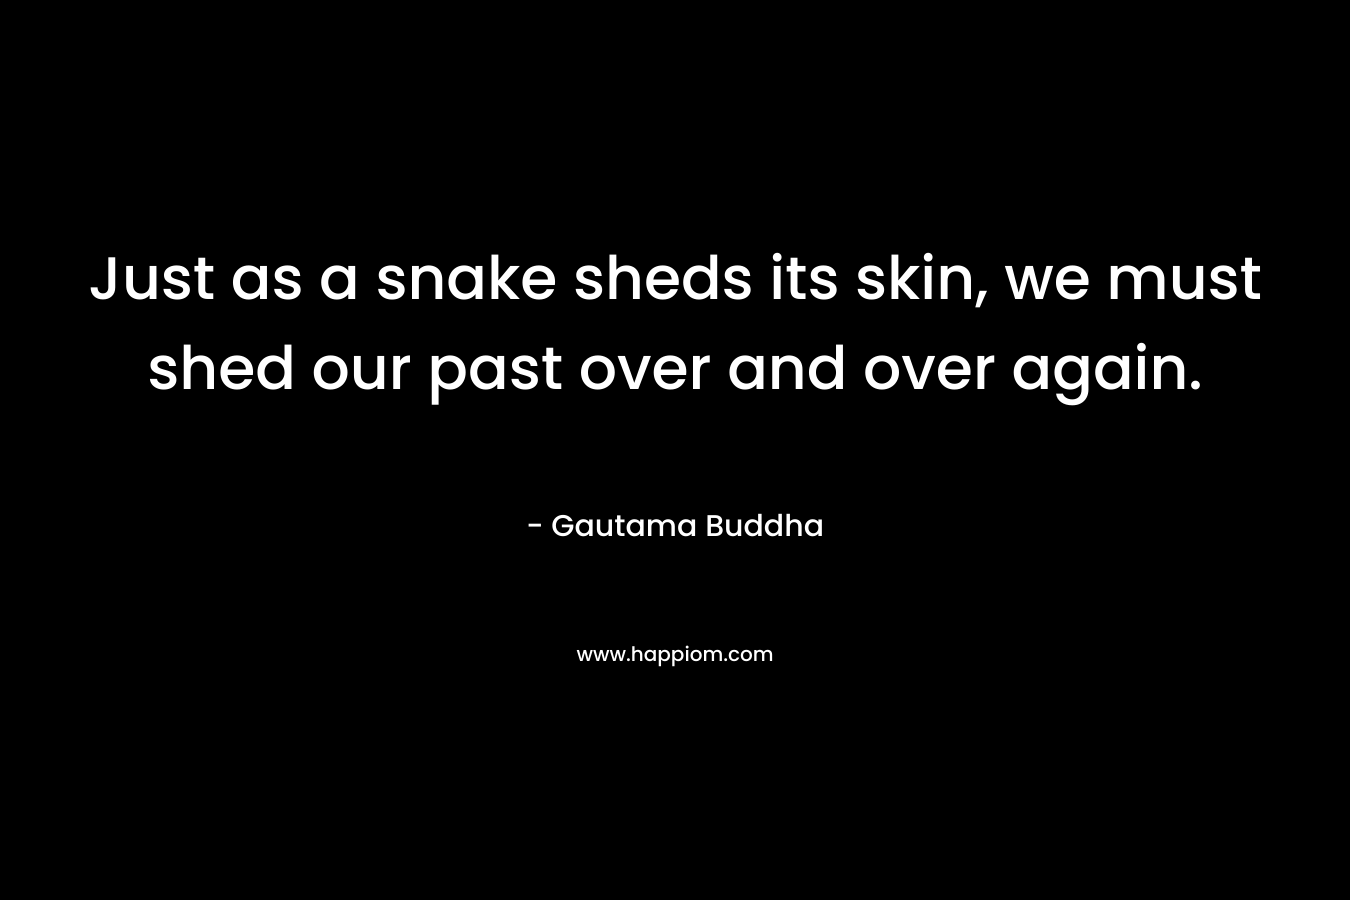 Just as a snake sheds its skin, we must shed our past over and over again.